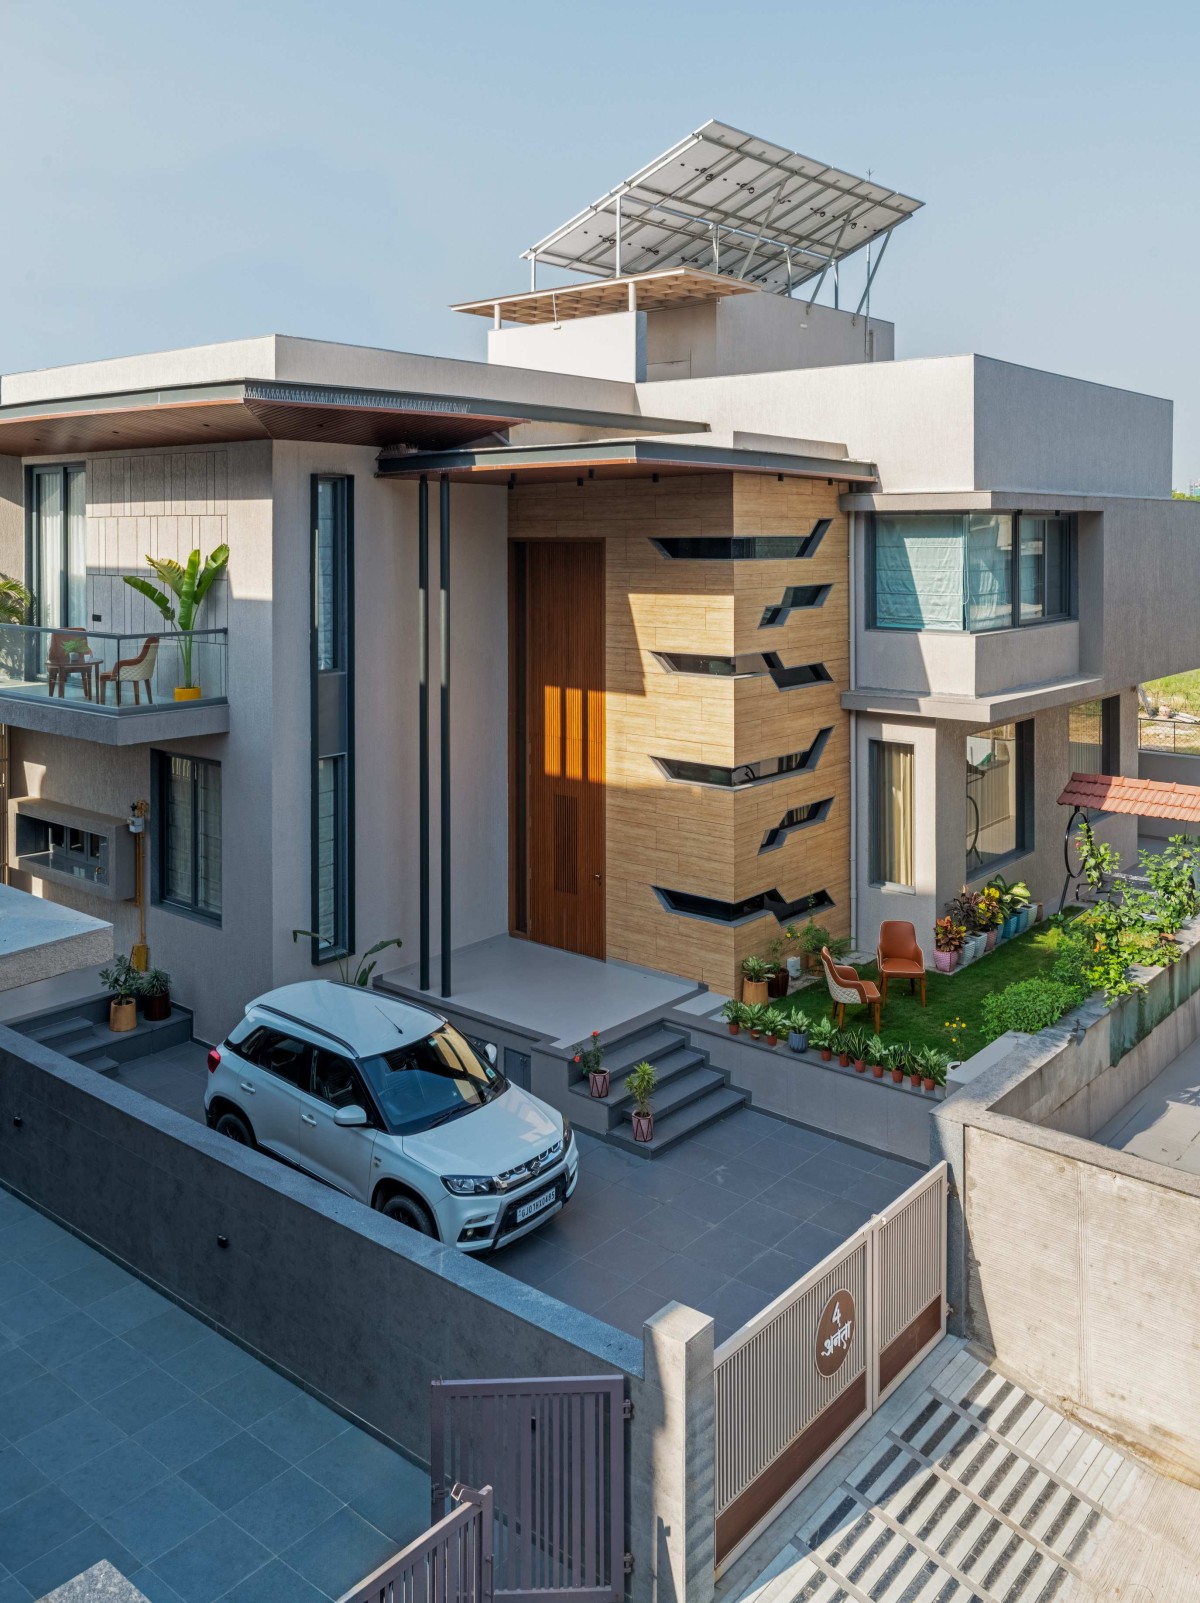 Exterior view of Ananta Bungalow by Kalajeet Architects